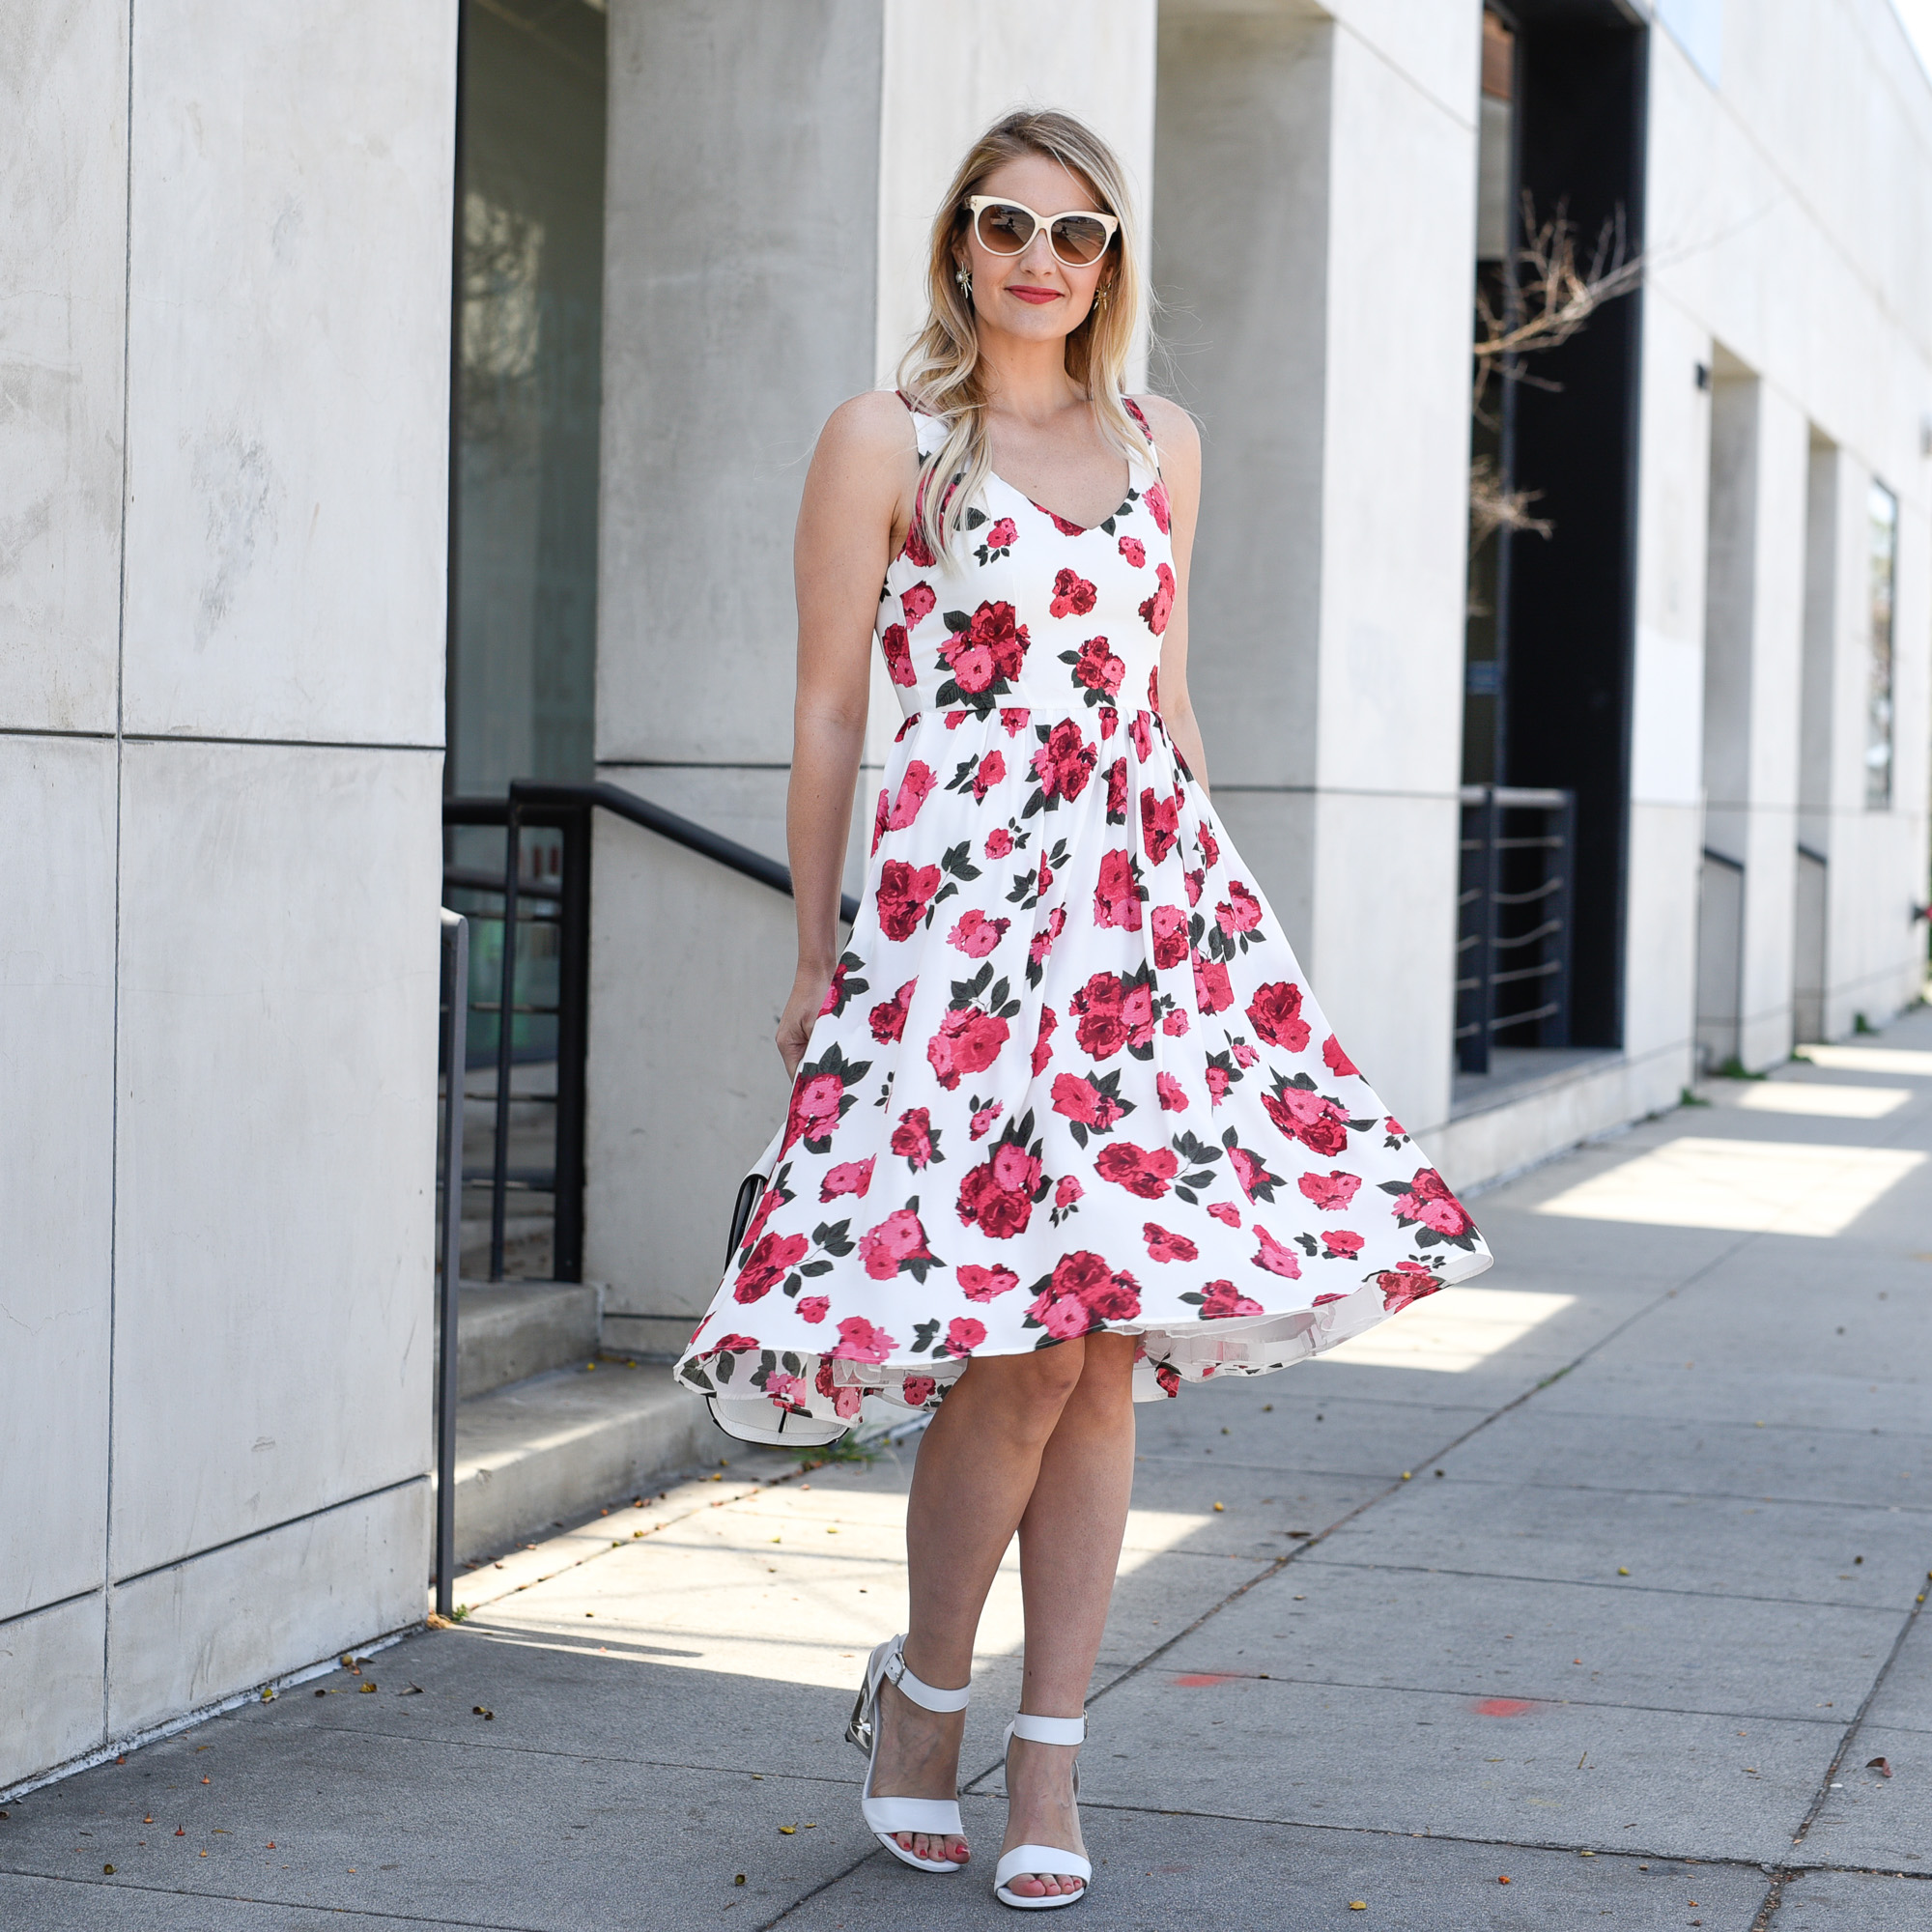 The perfect outfit for twirling to make you feel feminine 